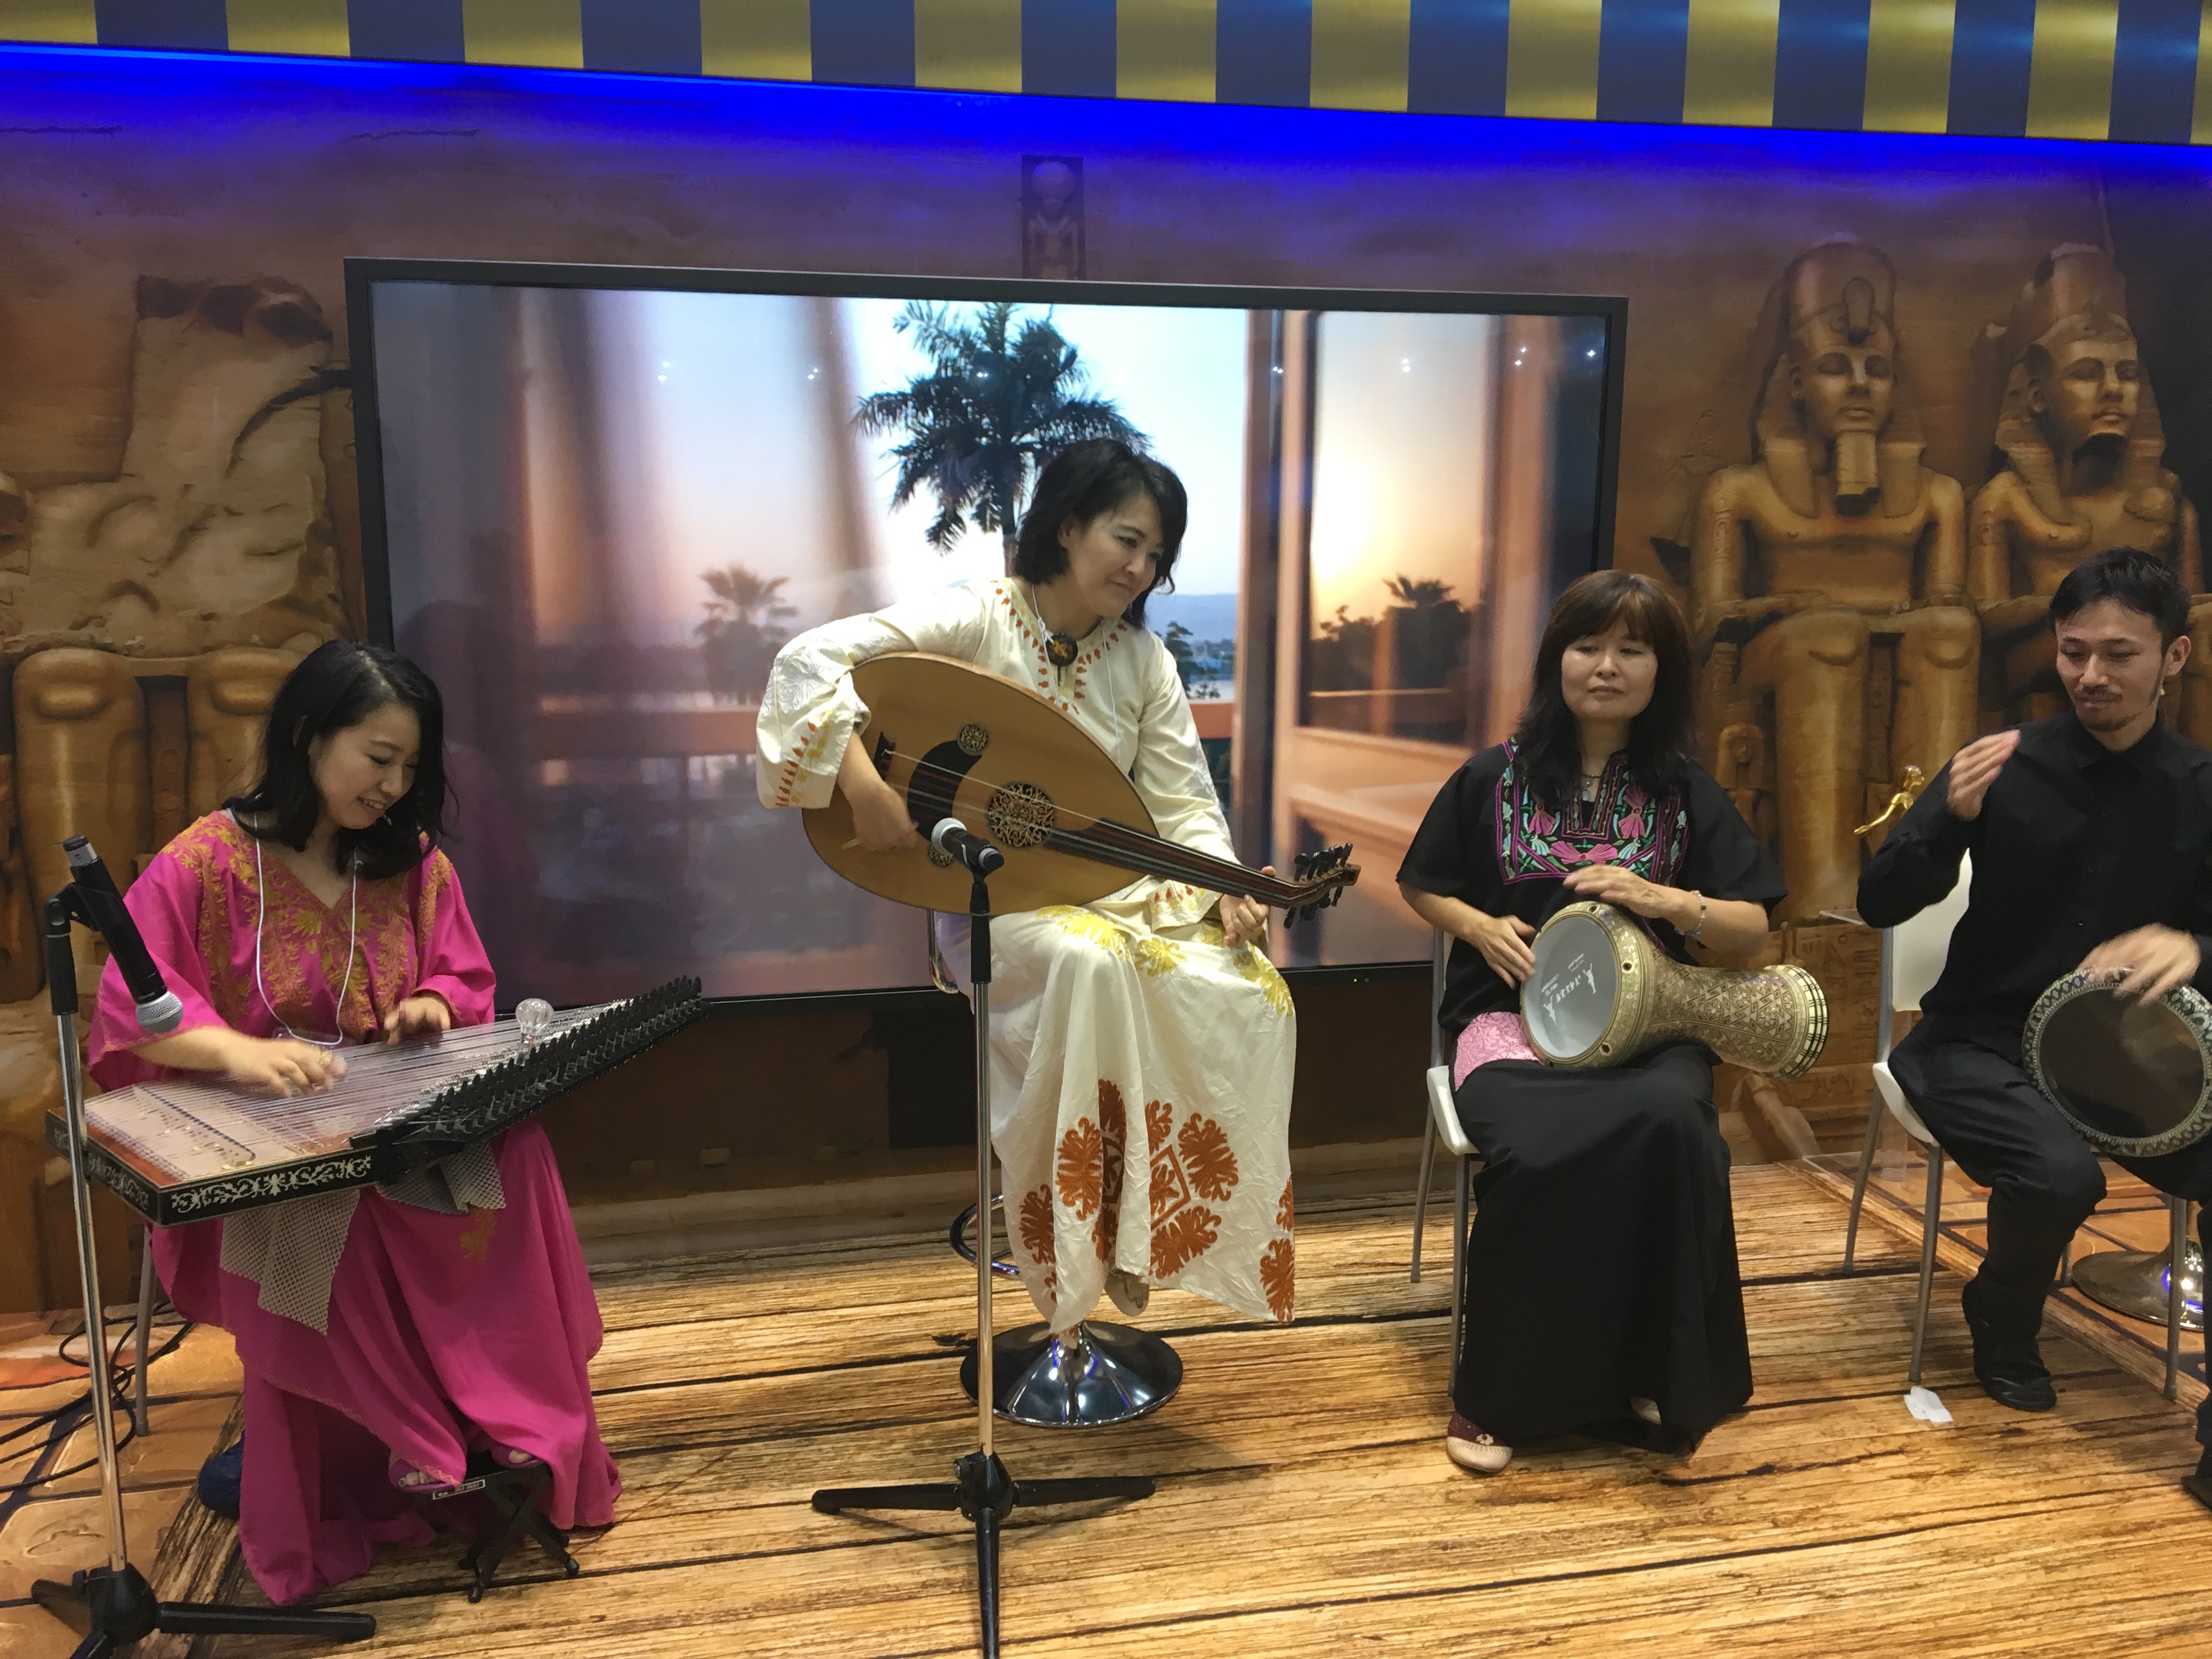 Oriental Music show during the Travel Trade fair in Japan